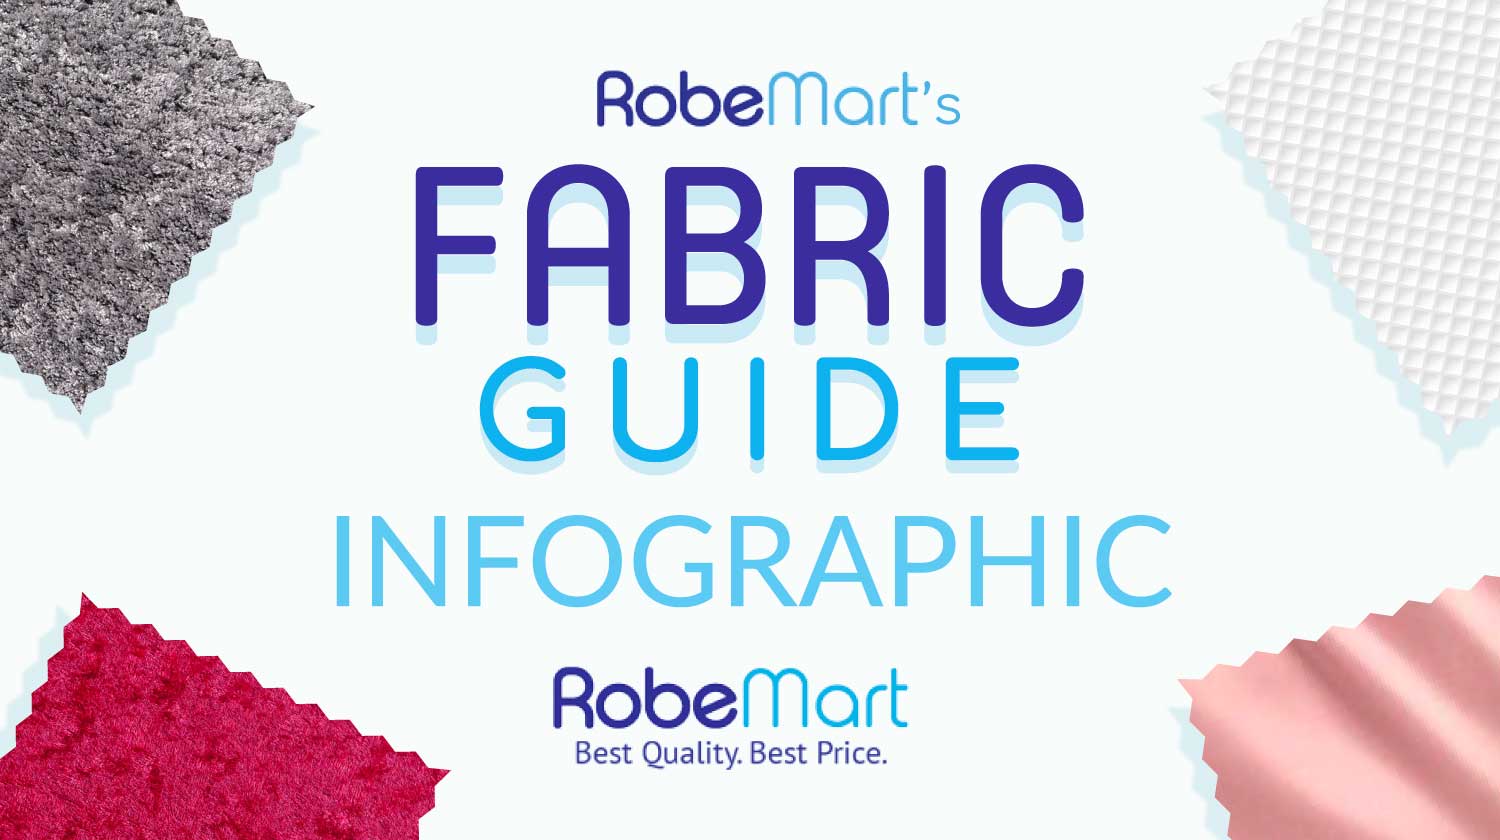 14 Most Absorbent fabrics - SewGuide